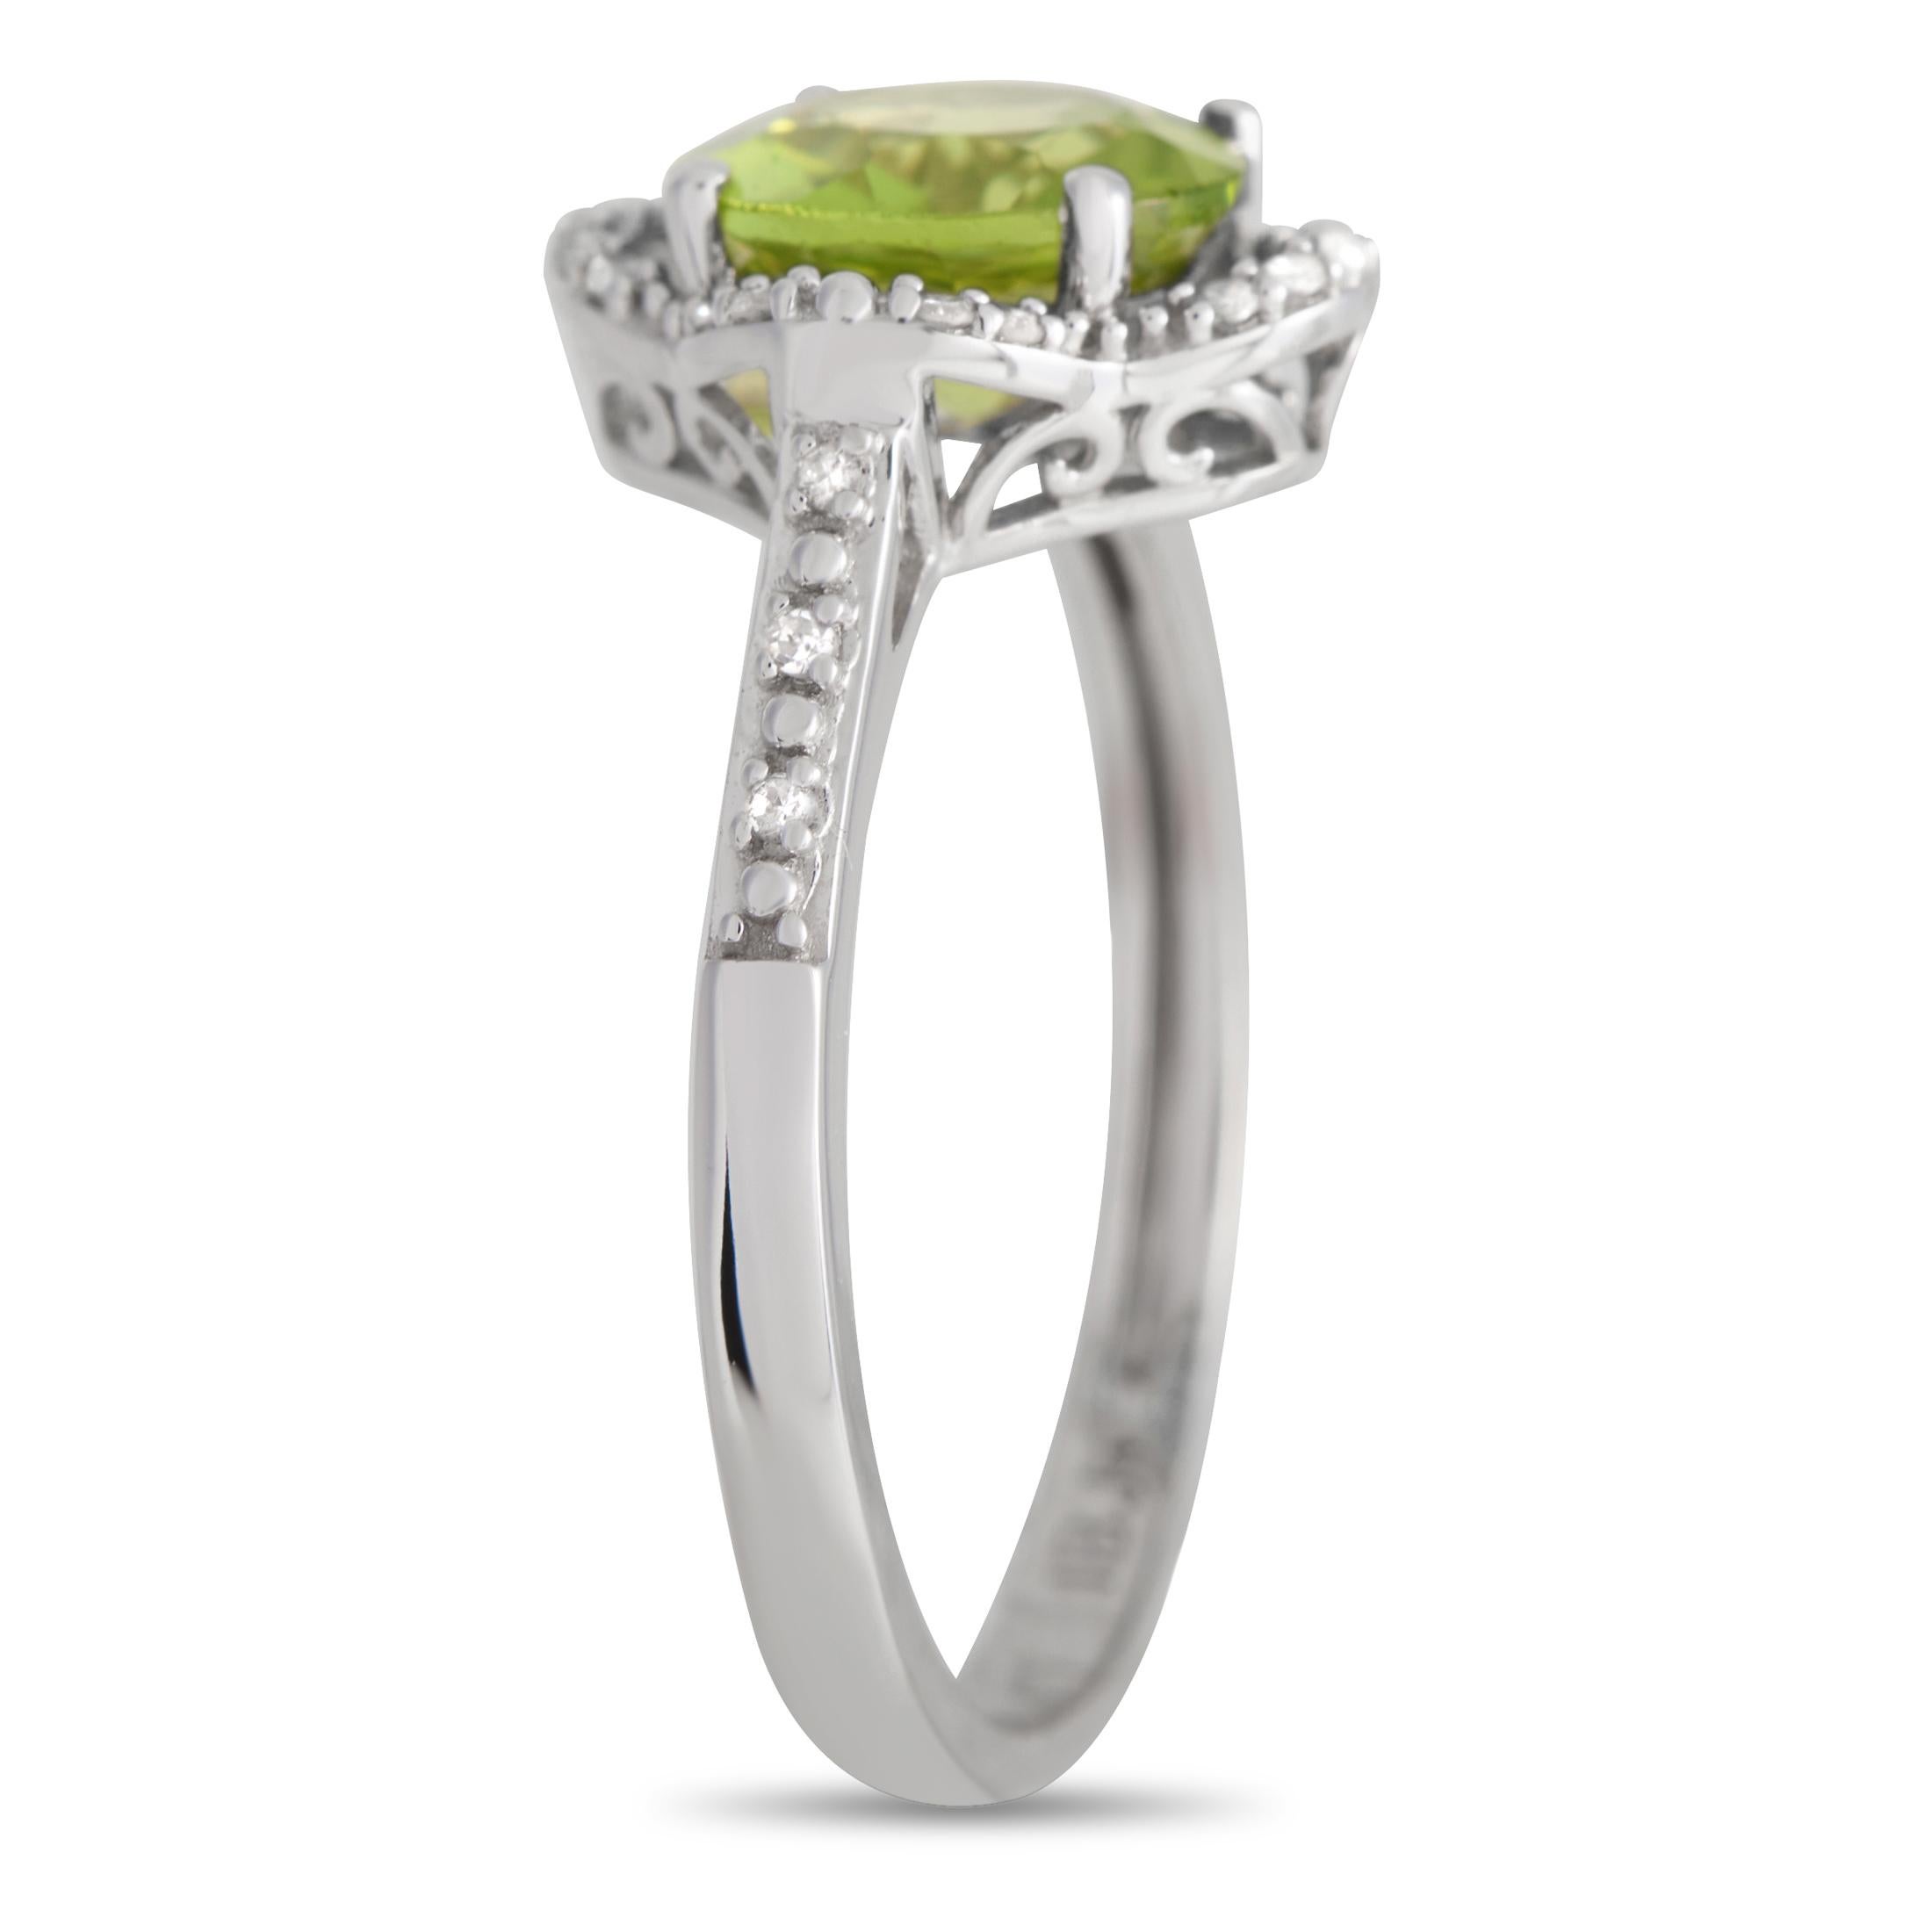 Bearing what they call the 'stone of compassion,' this peridot ring glows beautifully with its bright, happy green hue. The round peridot sits at the center of a quatrefoil setting with a diamond-traced outline and swirl embellishment. The shoulders